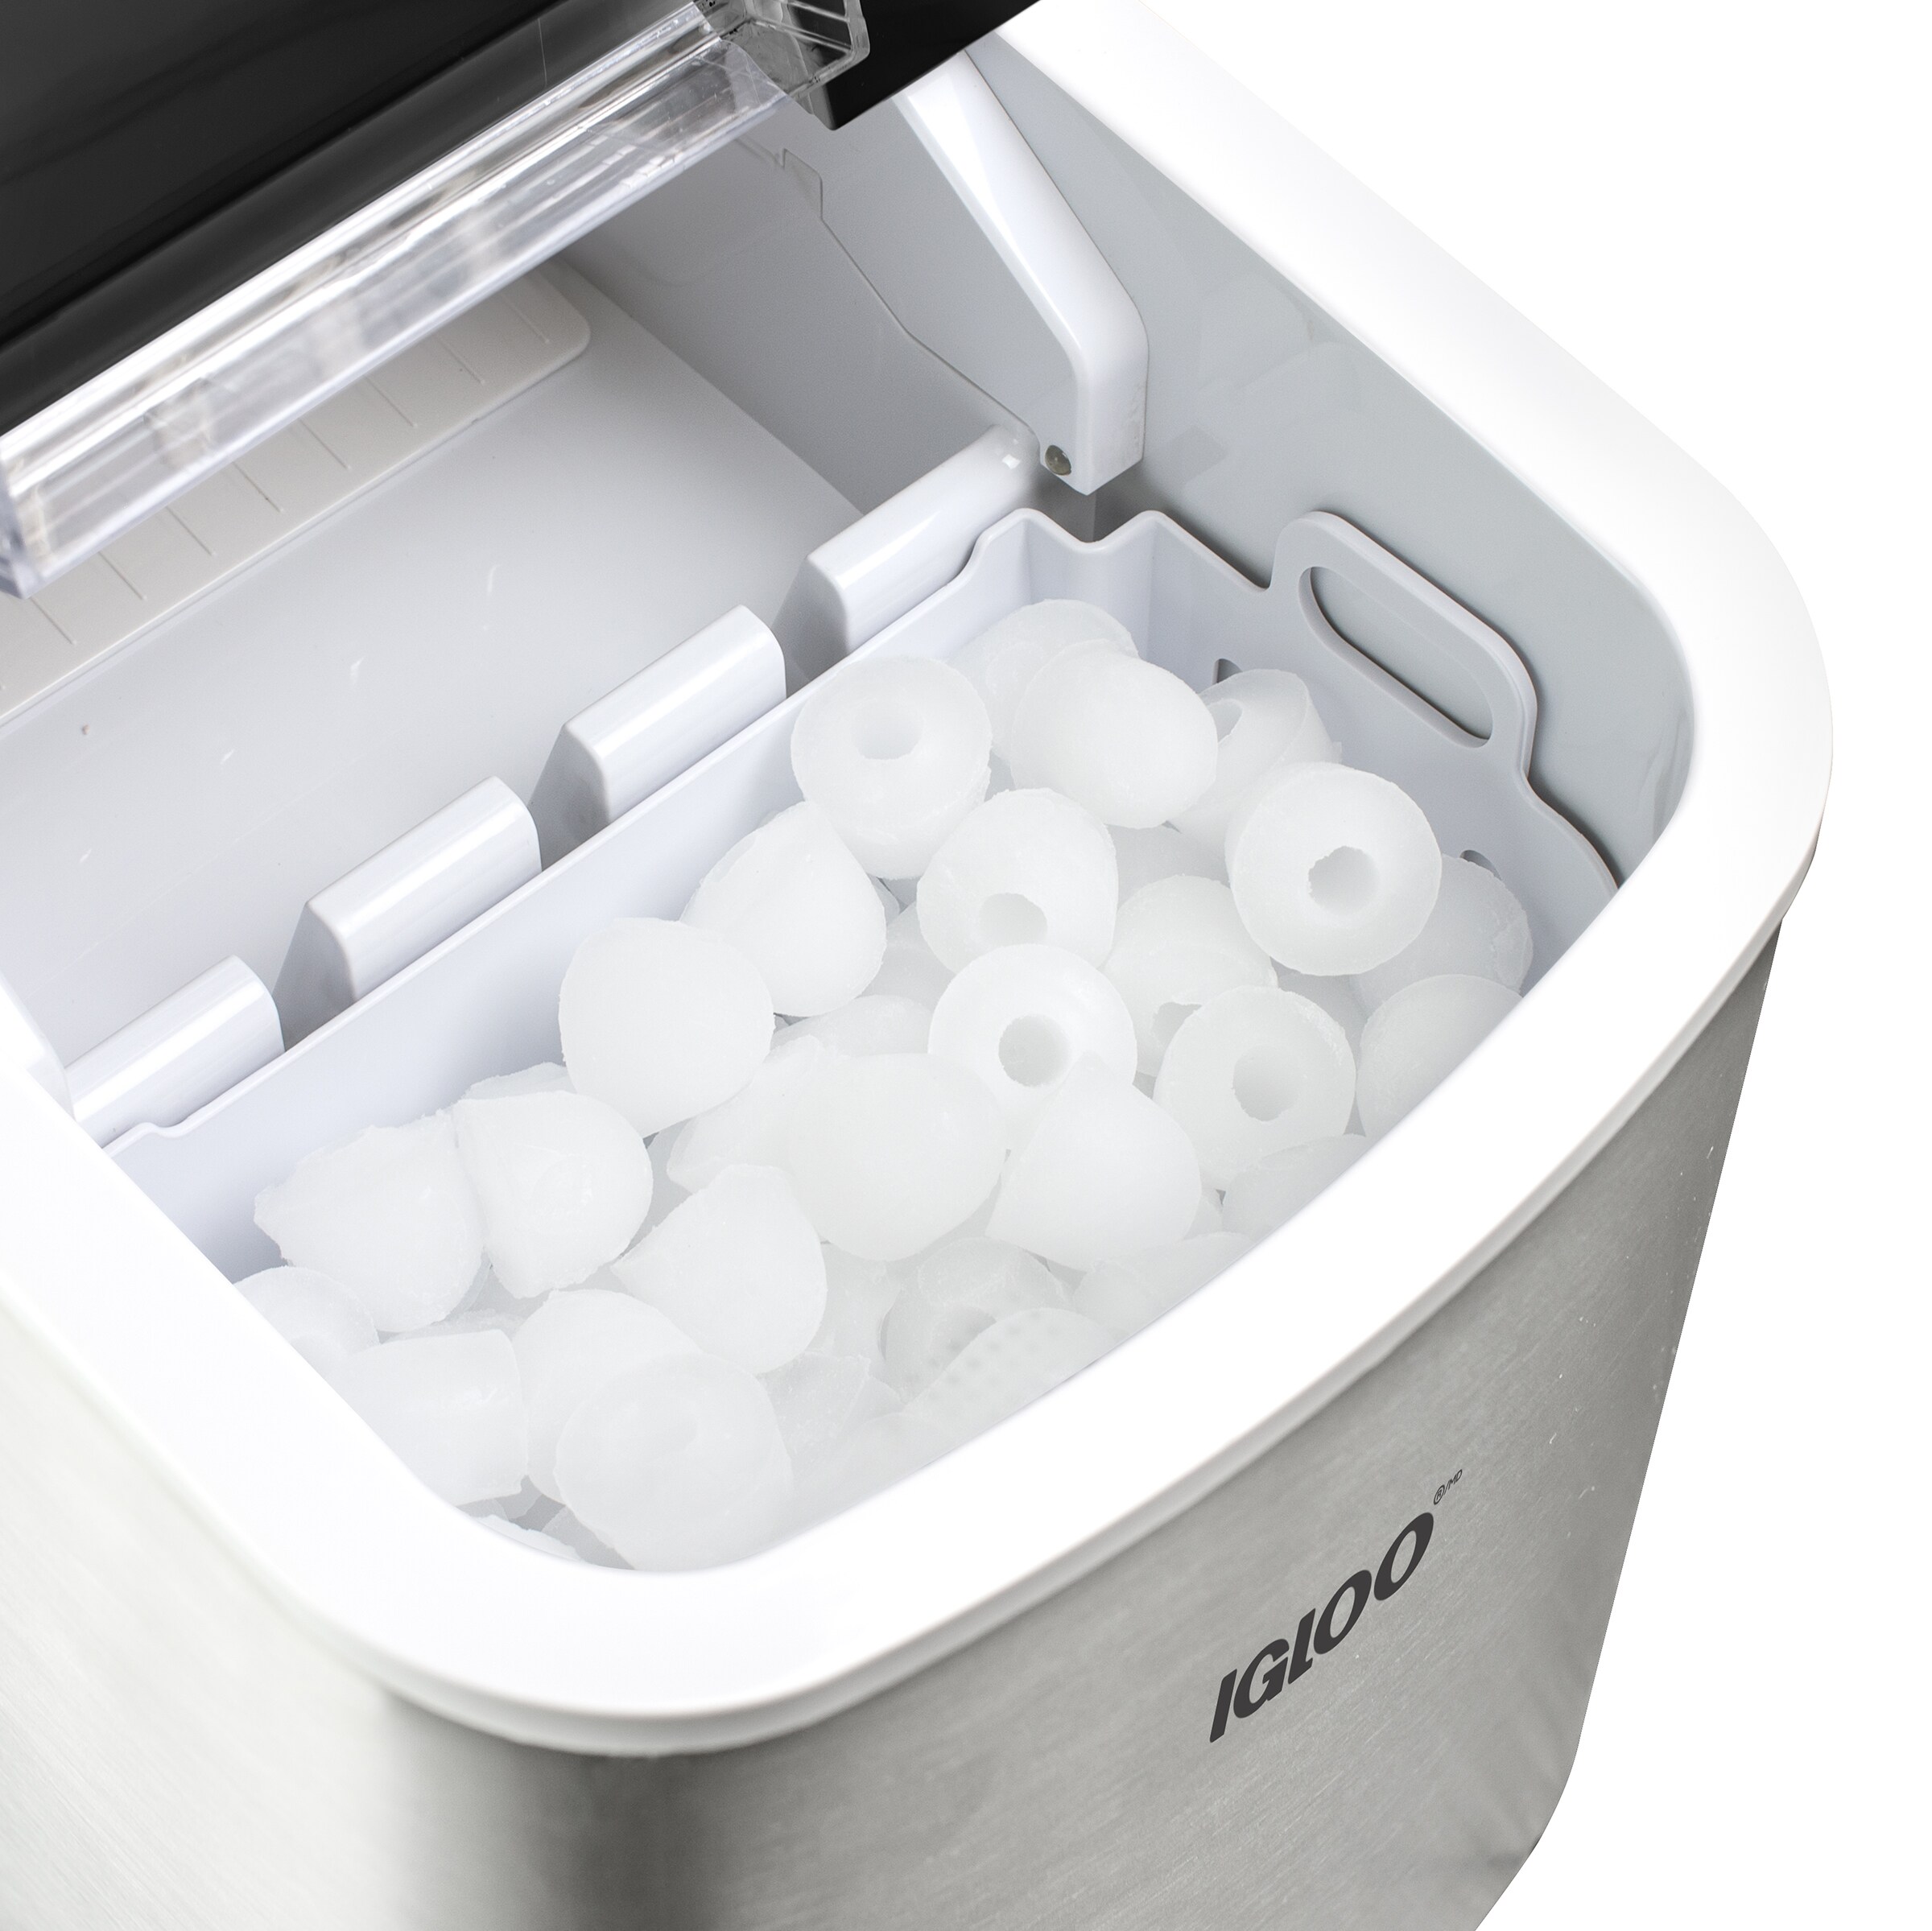 Choose the Best Countertop Ice Maker